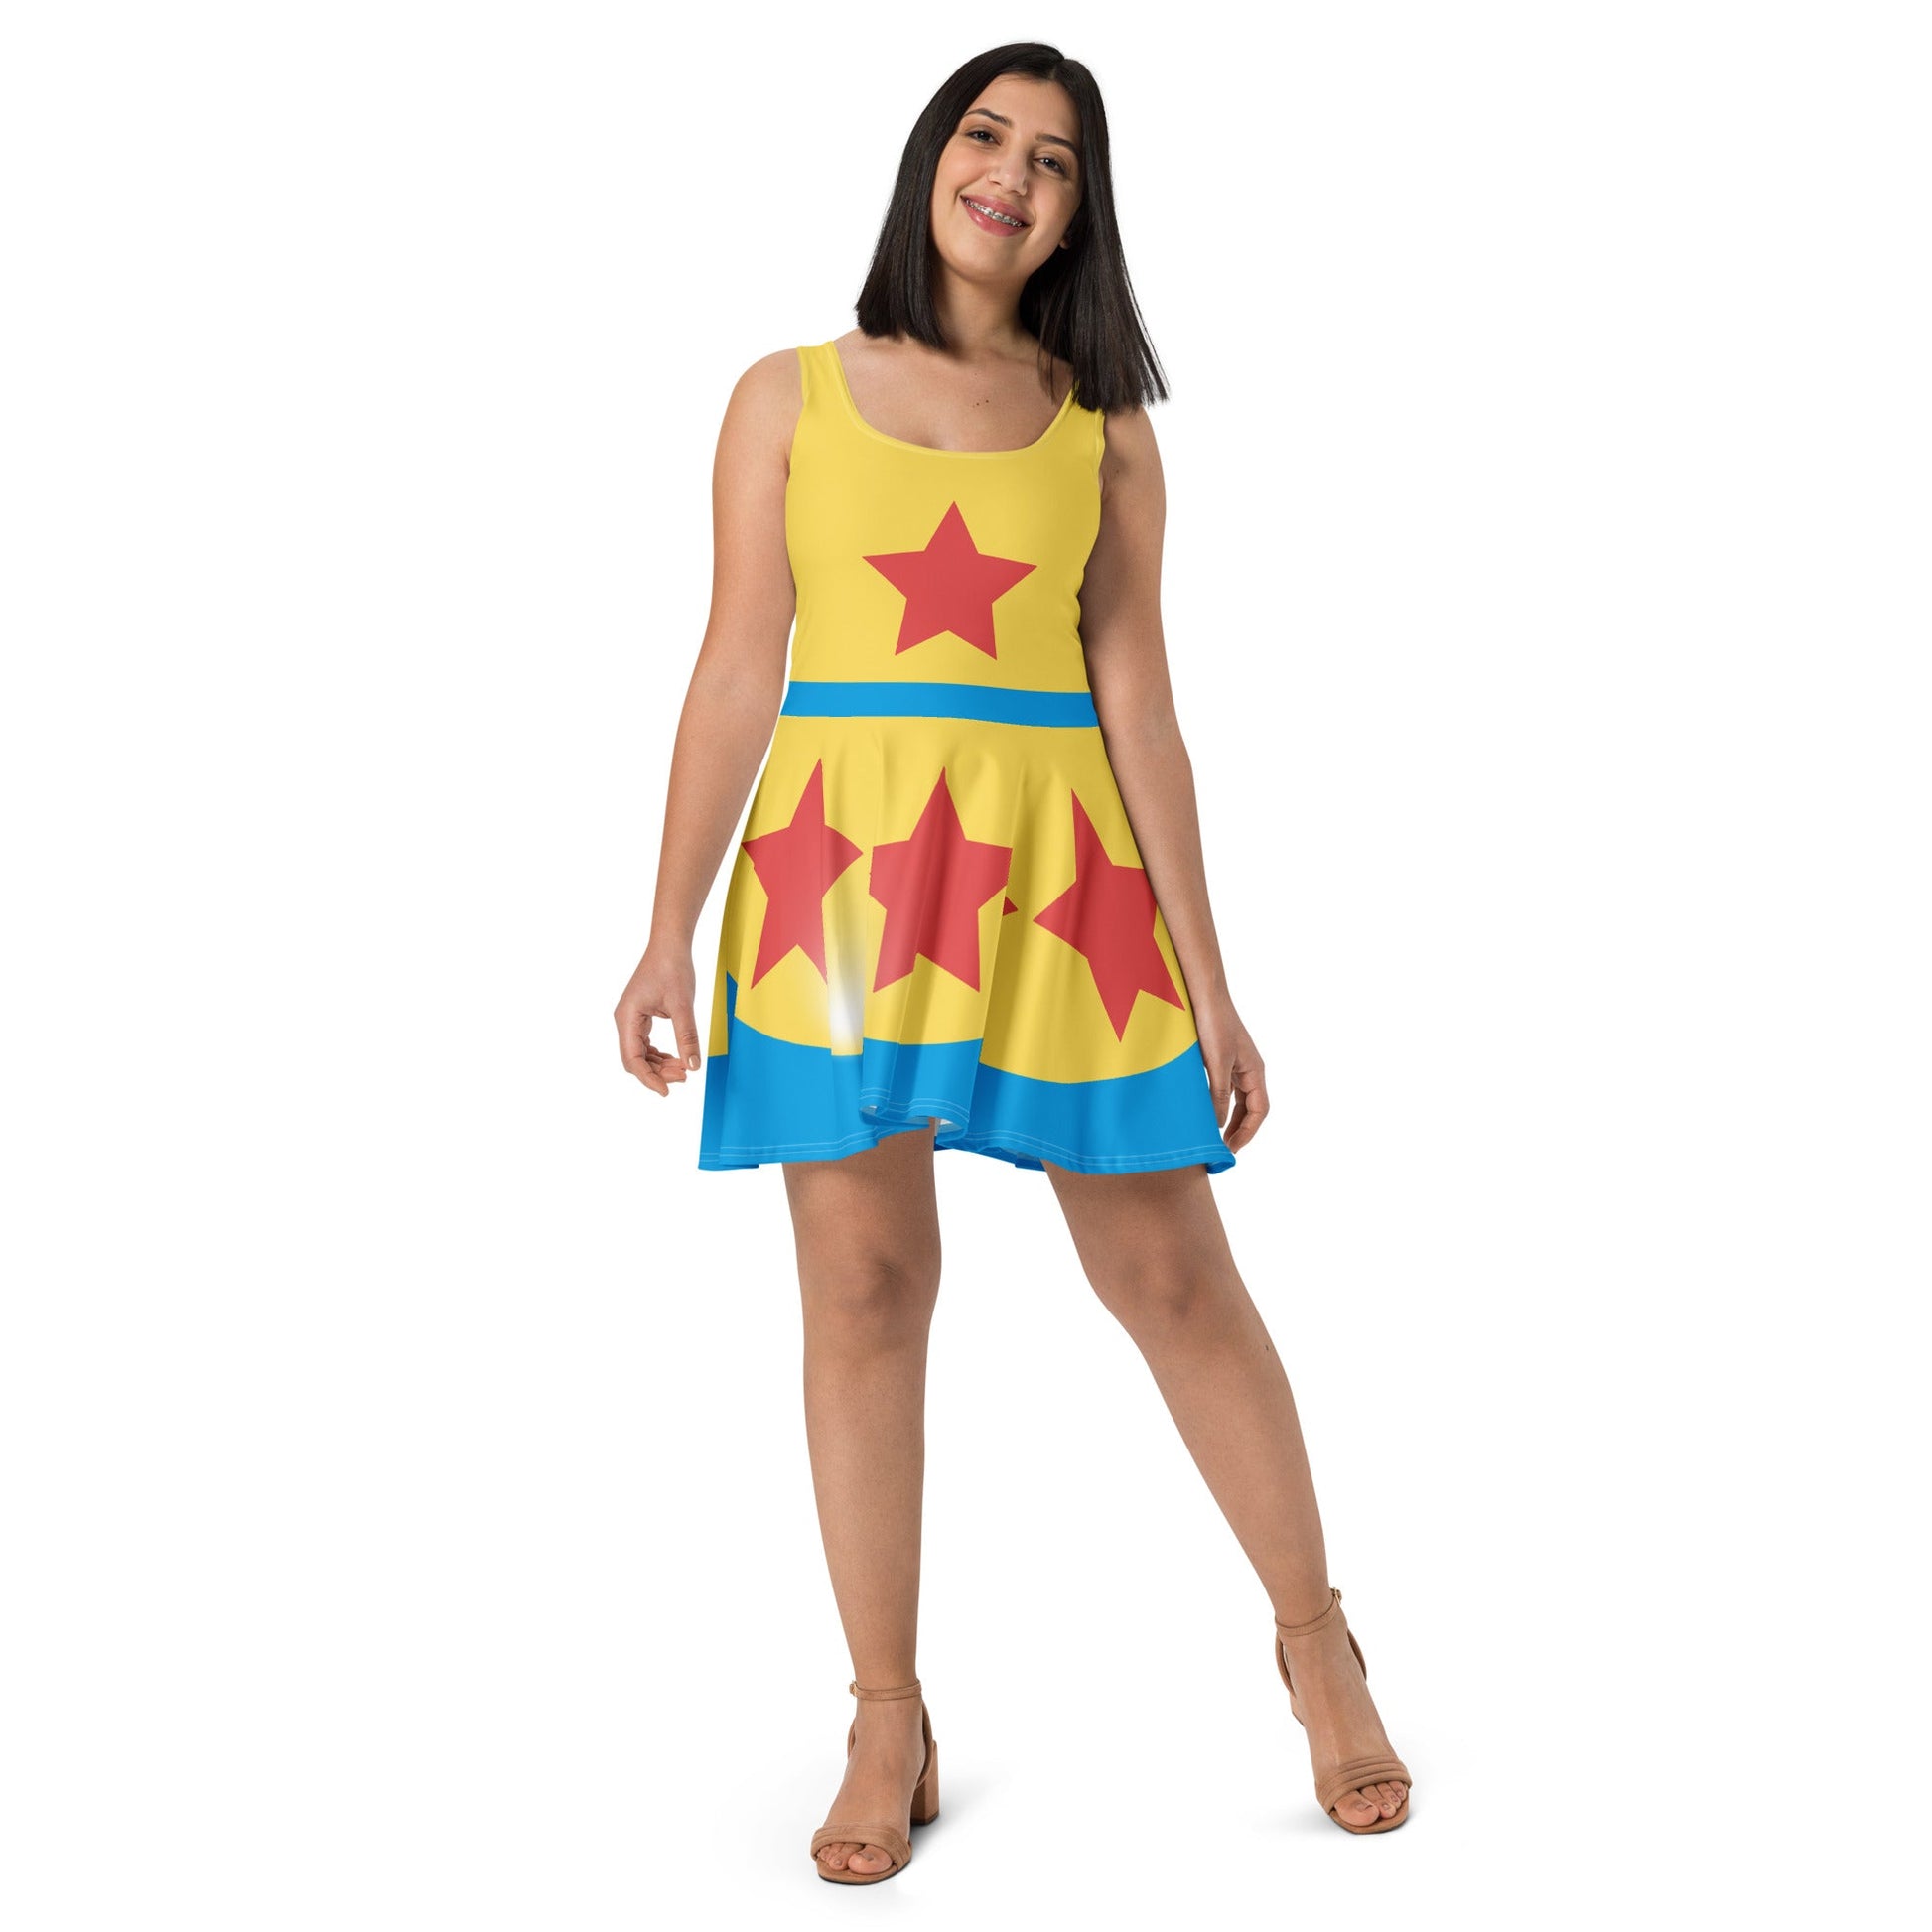 Cartoon Ball Skater Dress active wearboo to youcartoon style#tag4##tag5##tag6#